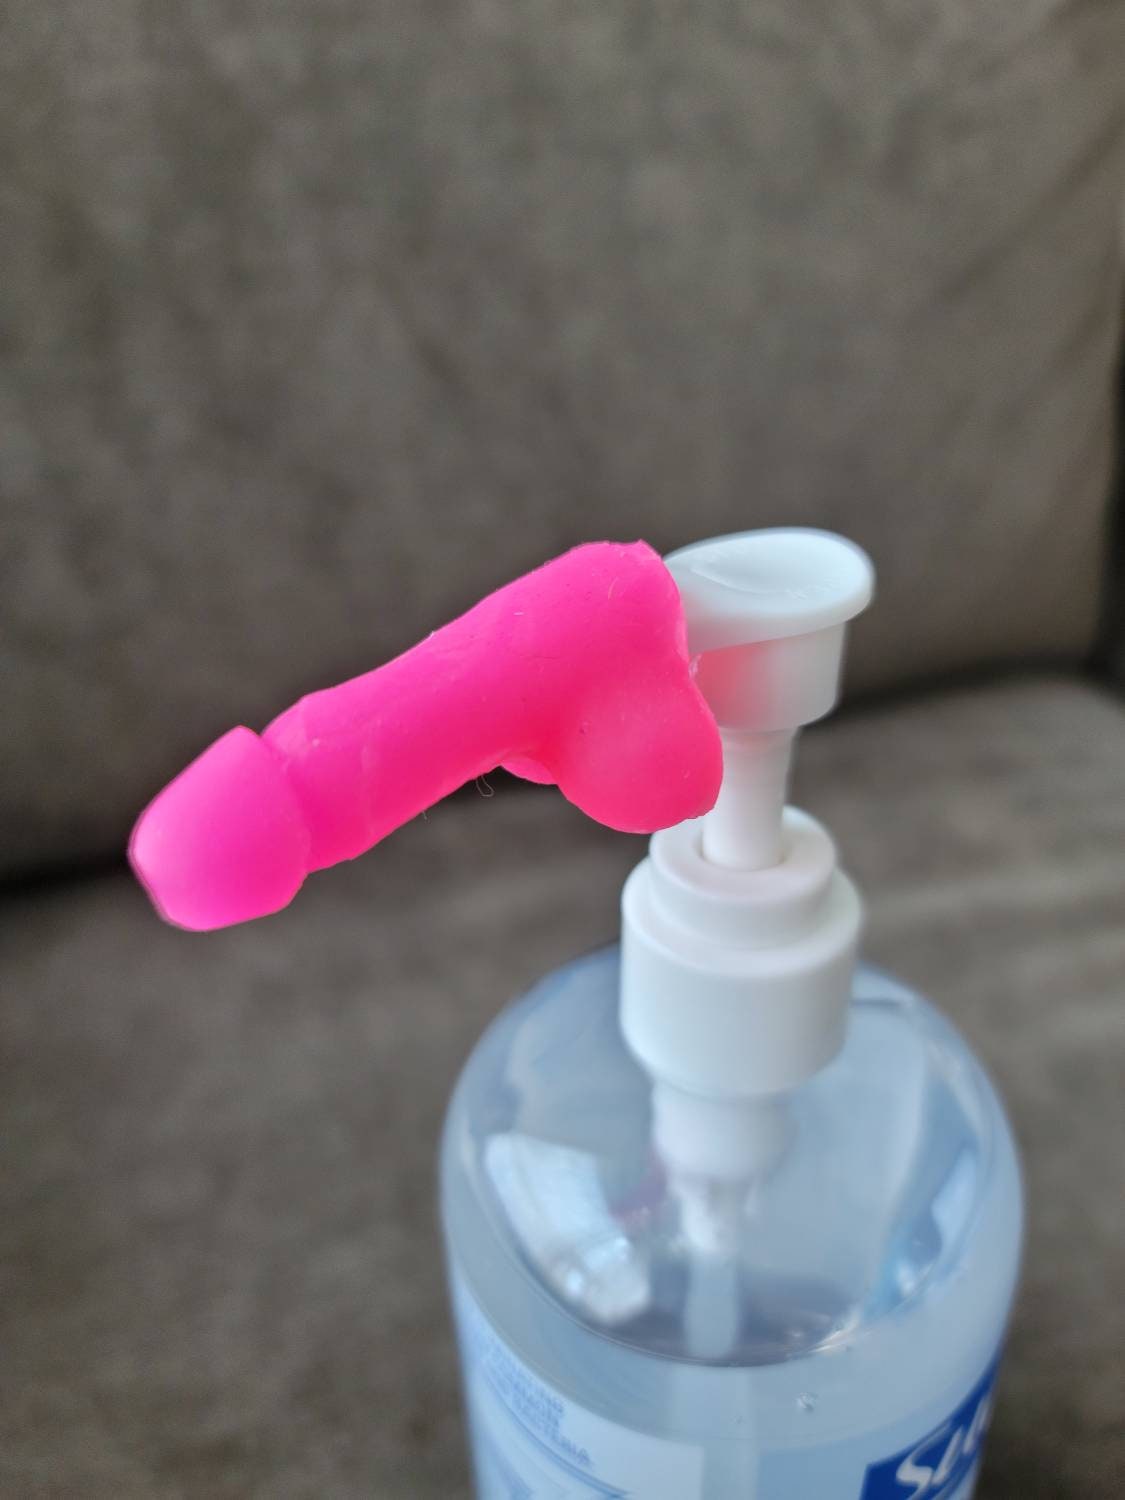 Penis Shaped Pump Cover Soap Bottle Cover Lotion Cover